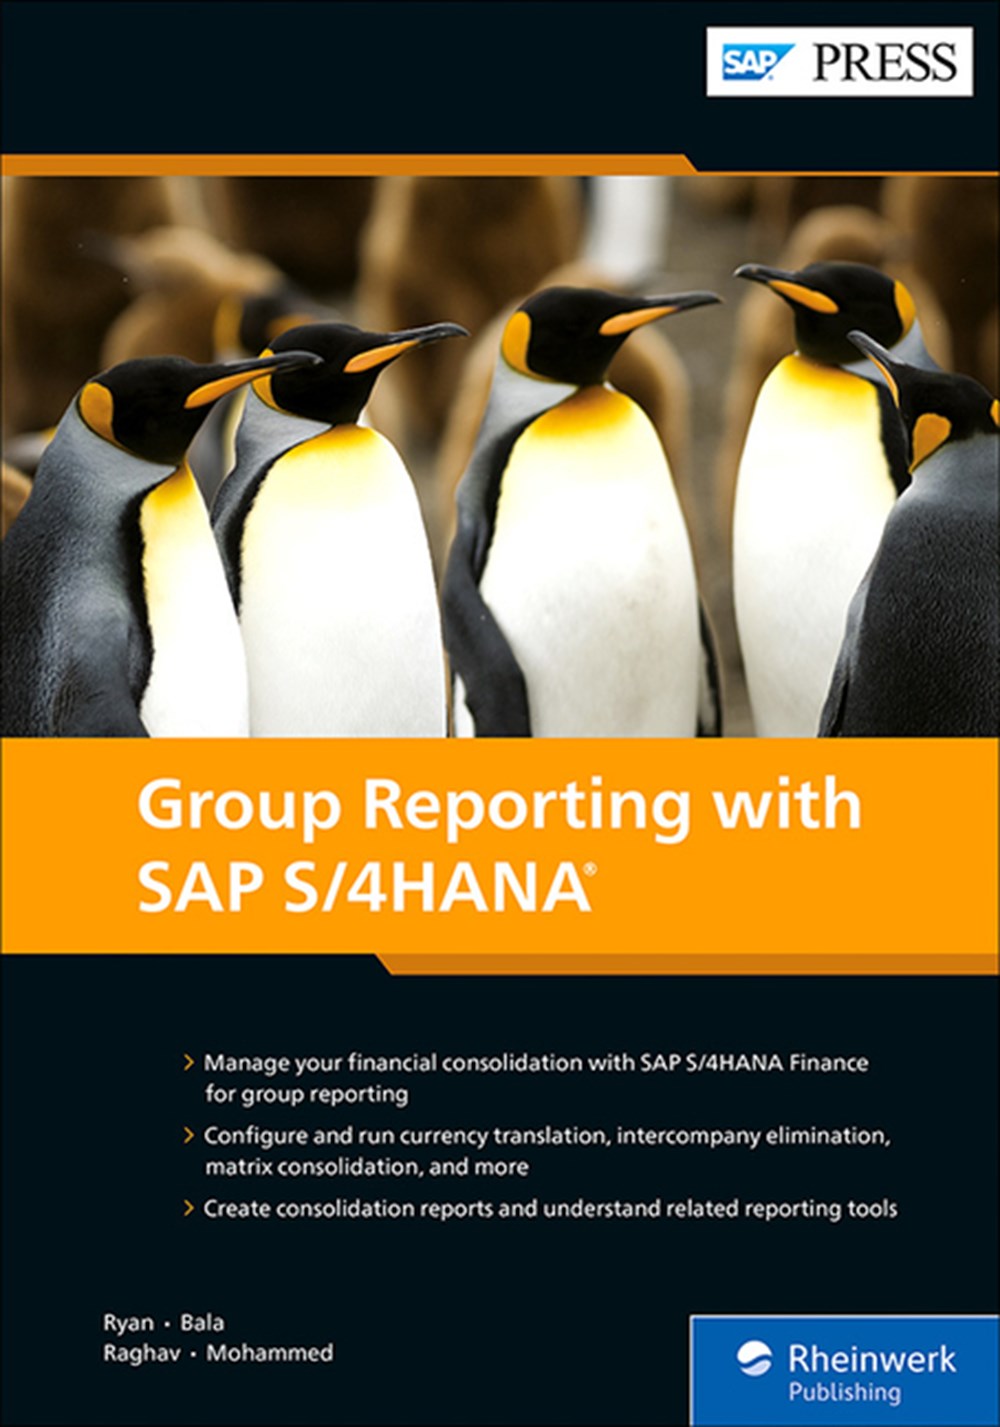 Group Reporting with SAP S/4hana: Financial Consolidation Guide